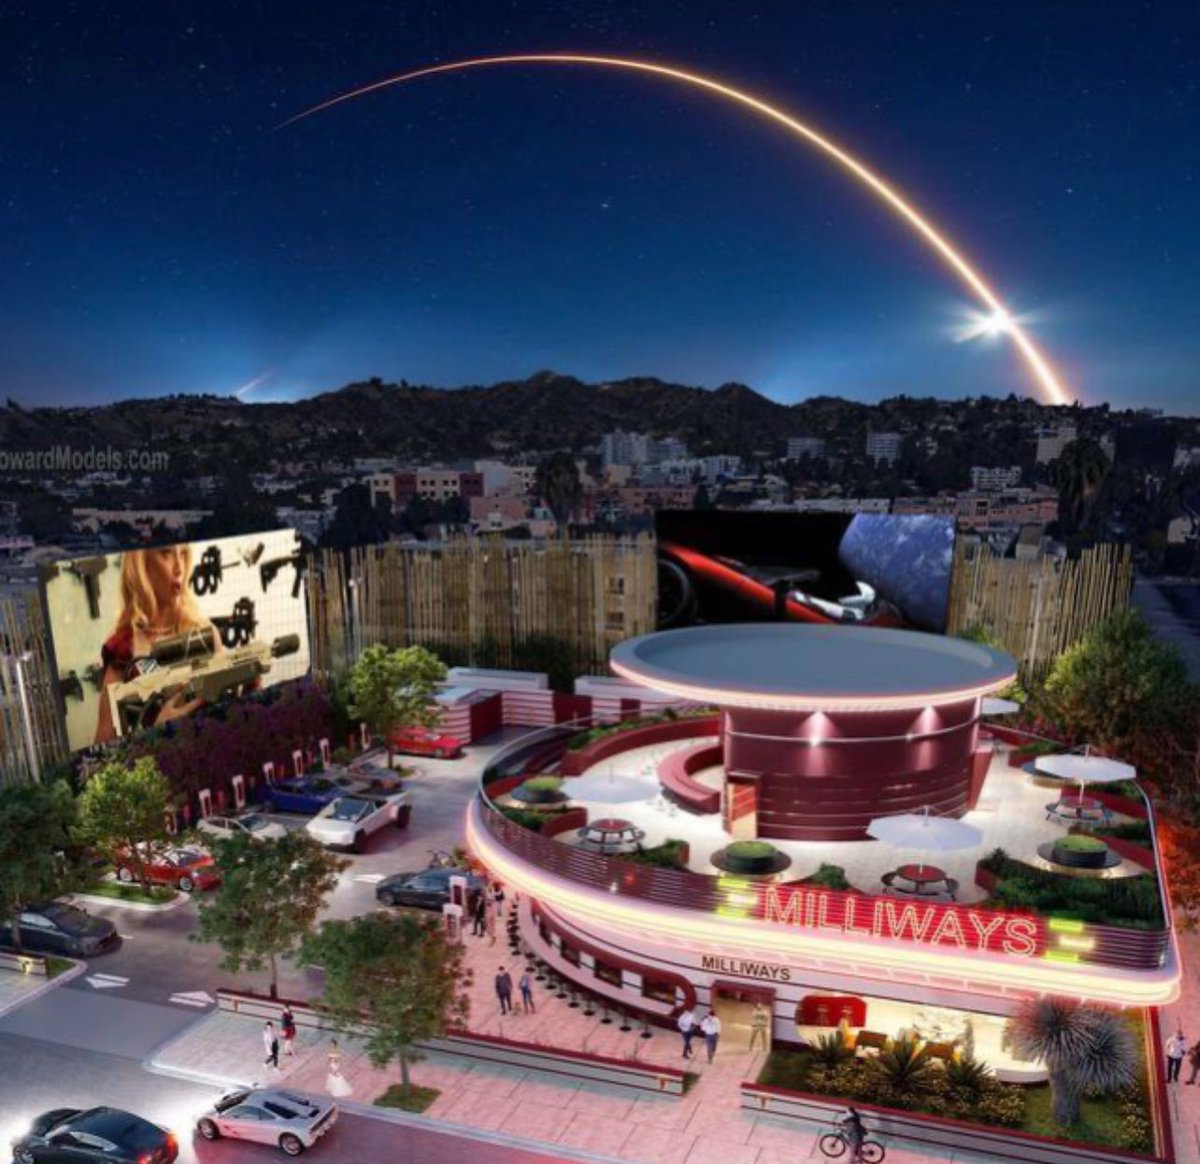 @presaleholder Tesla Diner Drive in Movie Theater Supercharger Station Official TG/#Milliways

#Milliways on ERC

Tesla is building a semi-circular two-story Diner with 29 Supercharger stalls and two movie theater screens on Santa Monica Blvd in Hollywood. This will be all over the news and we